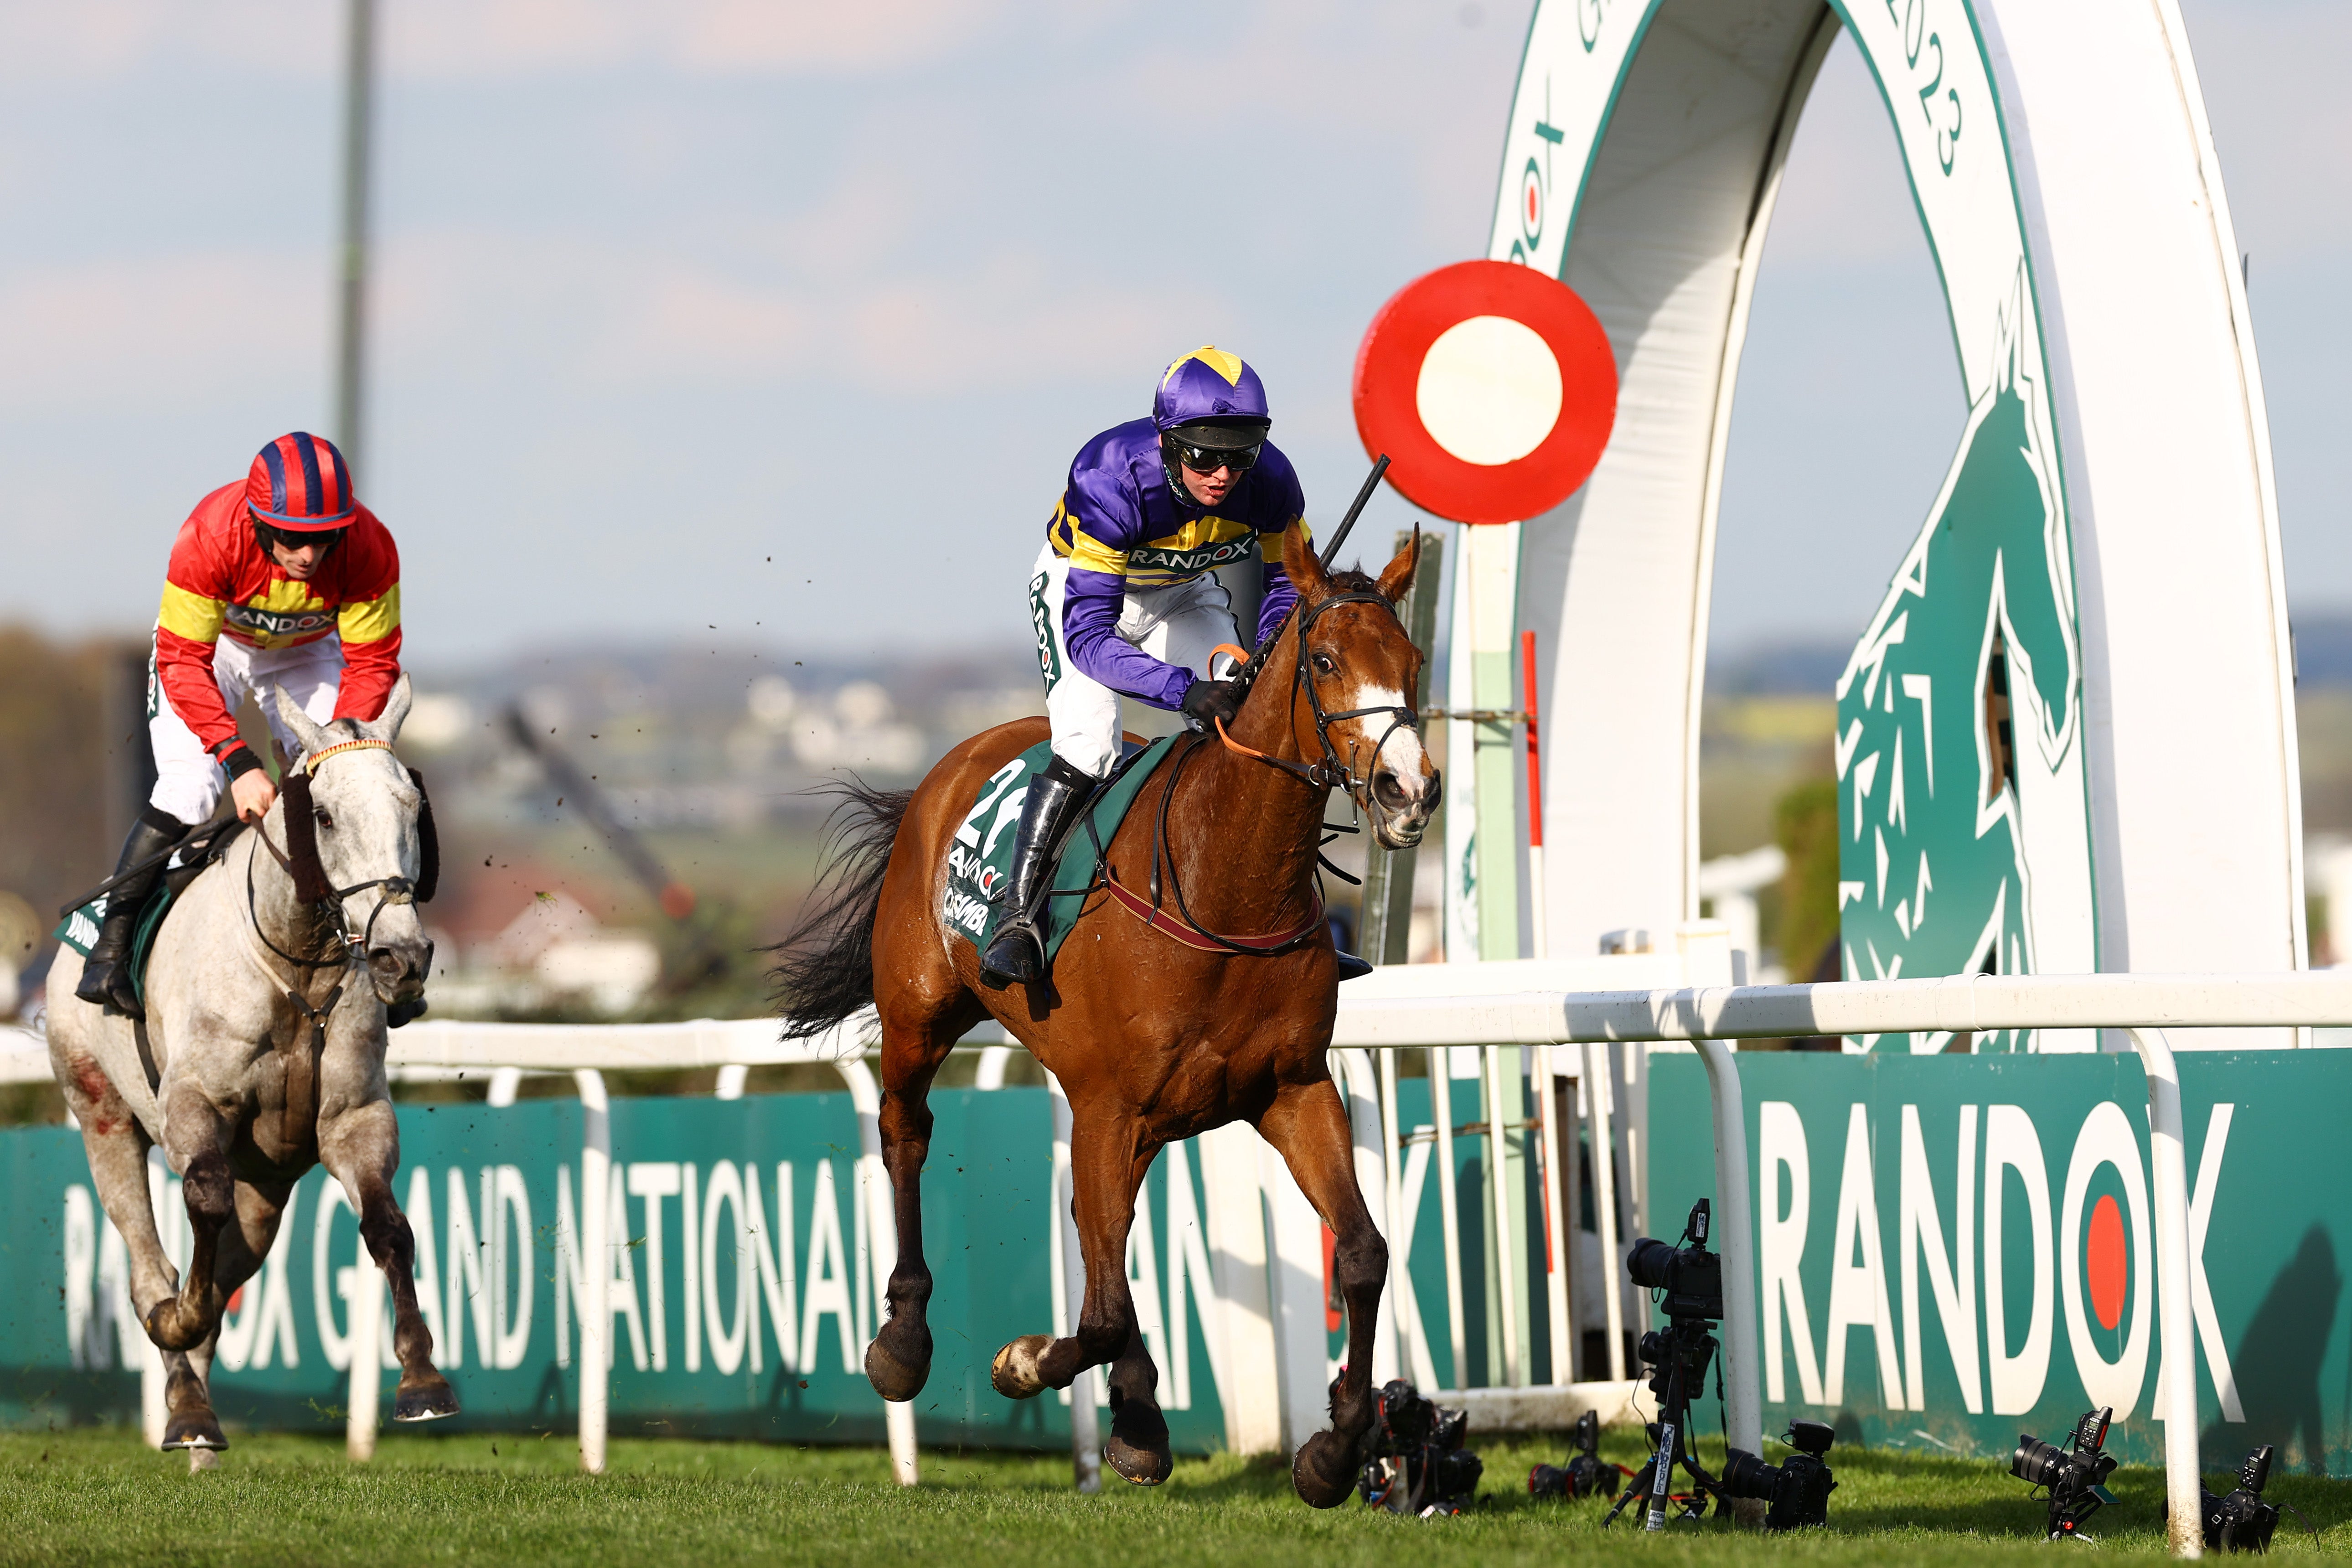 Corach Rambler is the favourite to win the Grand National